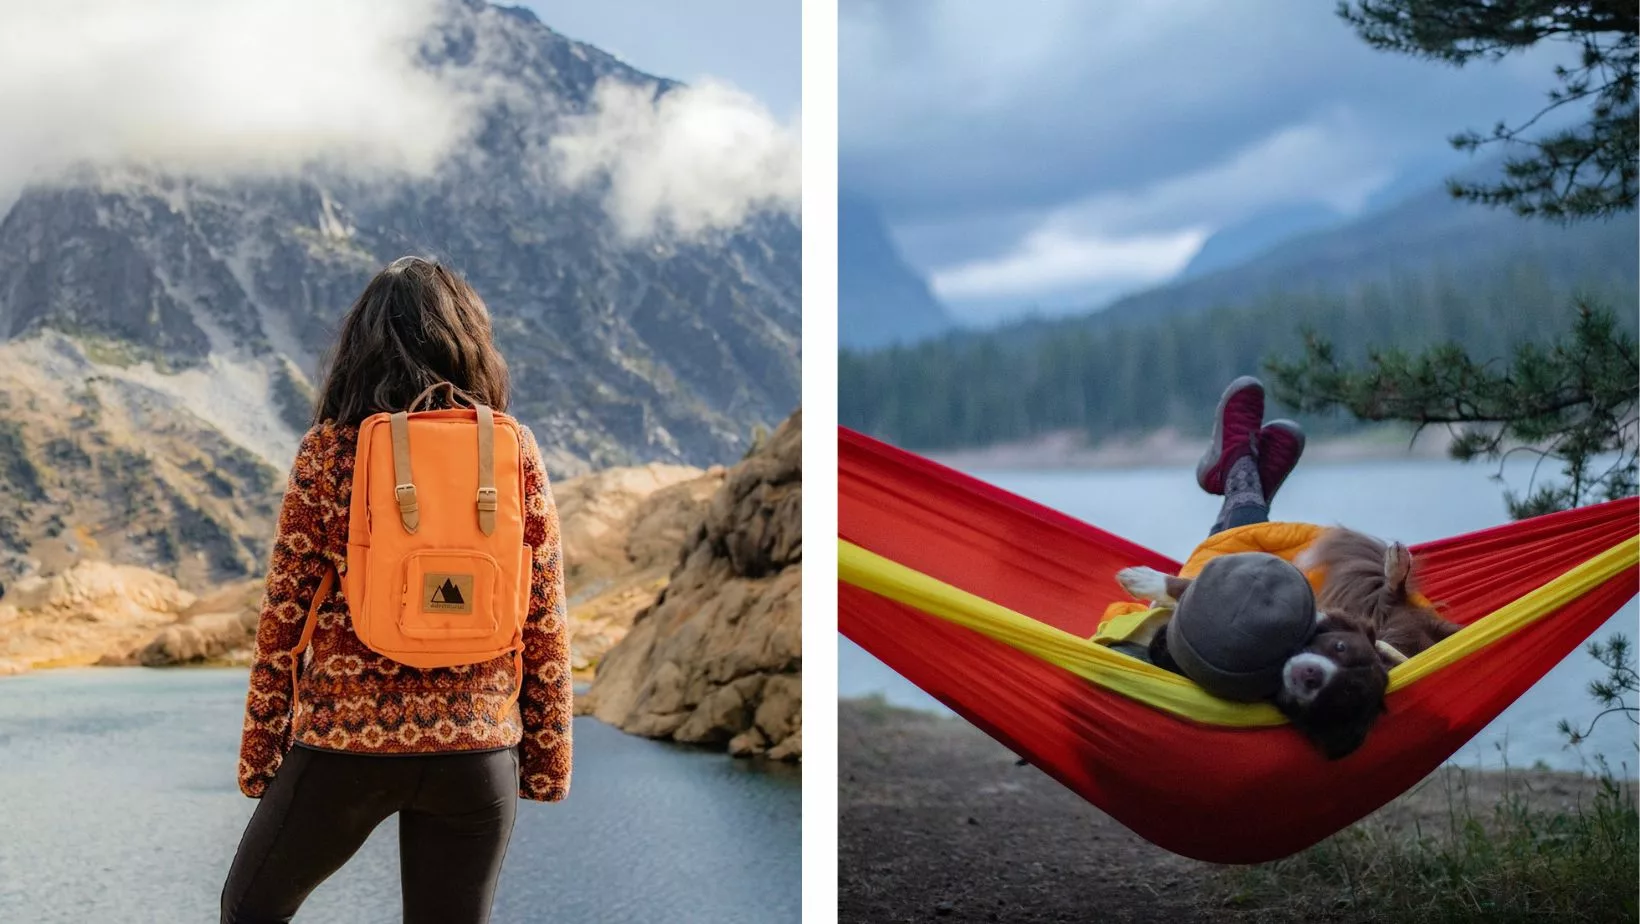 A Guide to Buying Vegan Outdoor Gear - Explore Magazine